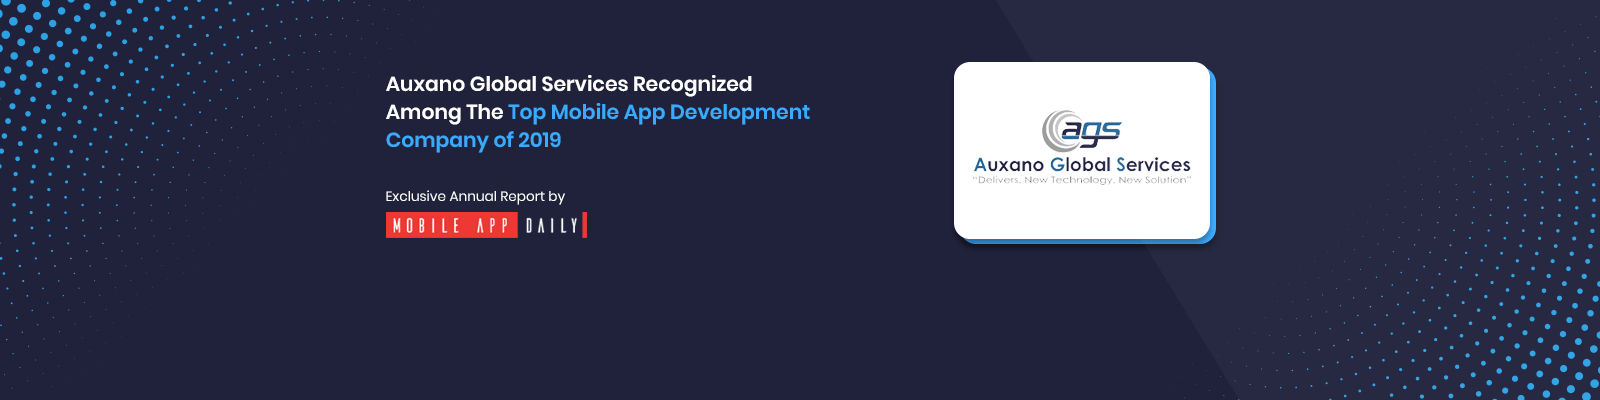 Auxano Global Services Gets Recognized As A Top Mobile App Development Company By MobileAppDaily Banner